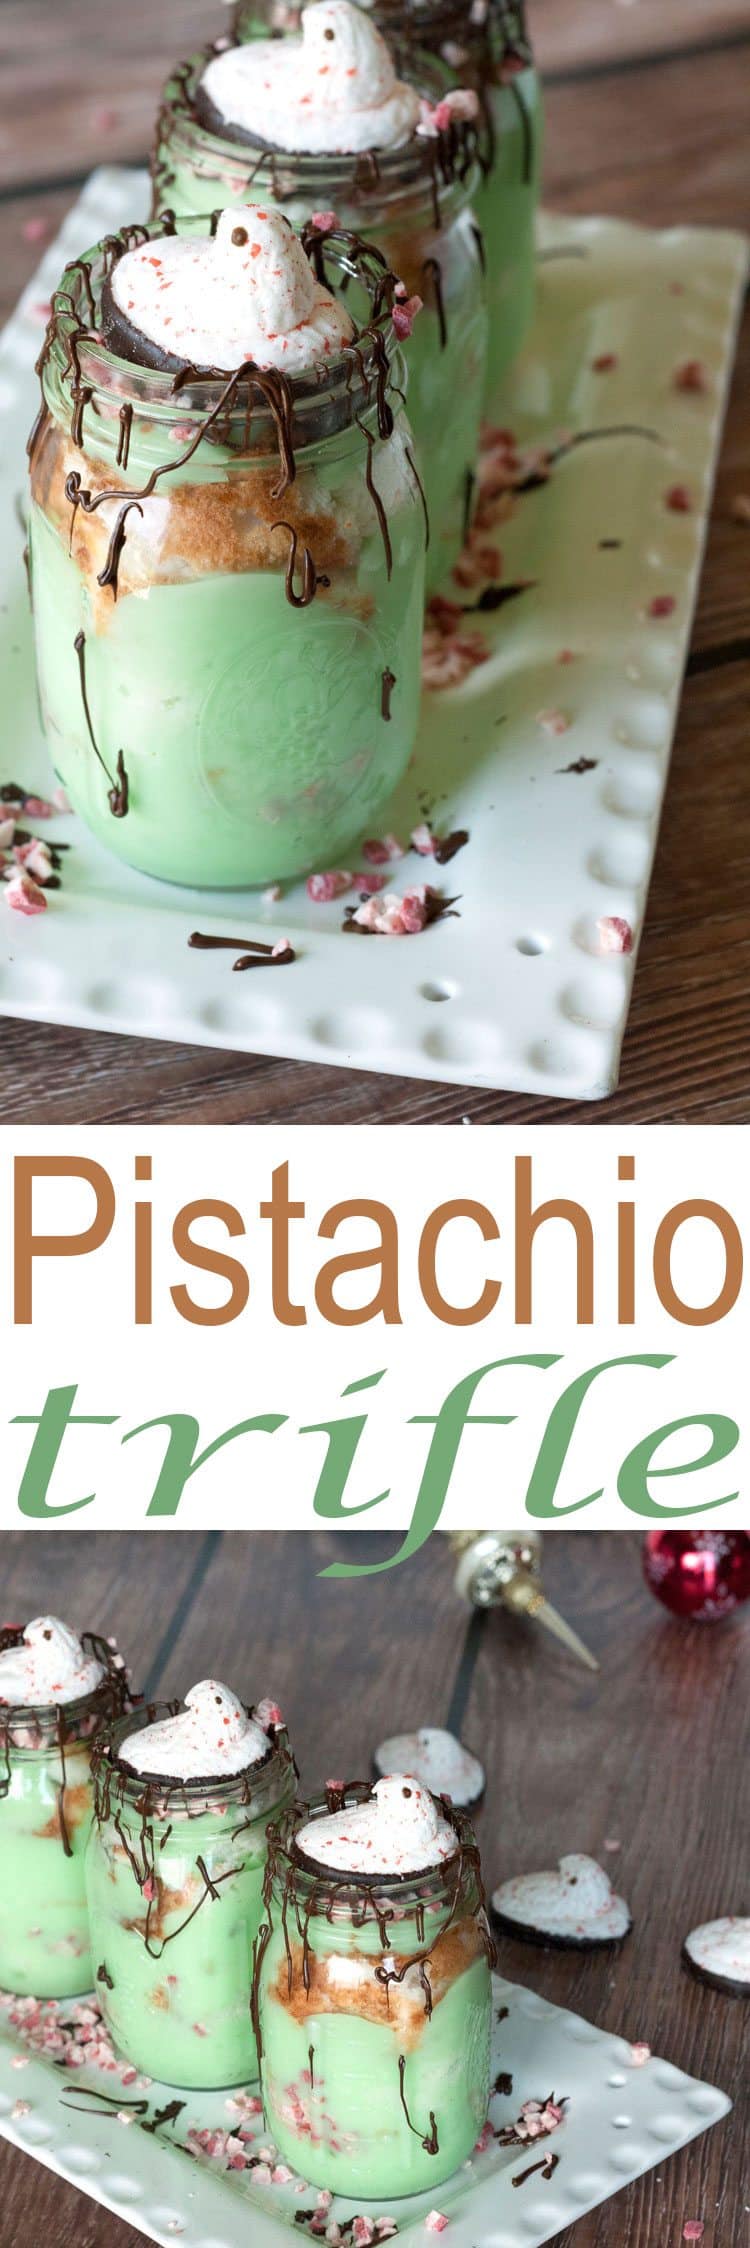 Best Holiday Trifle recipe. Our Pistachio Trifle is an easy dessert recipe and absolutely delicious! It is fun to make and a beautiful dessert.